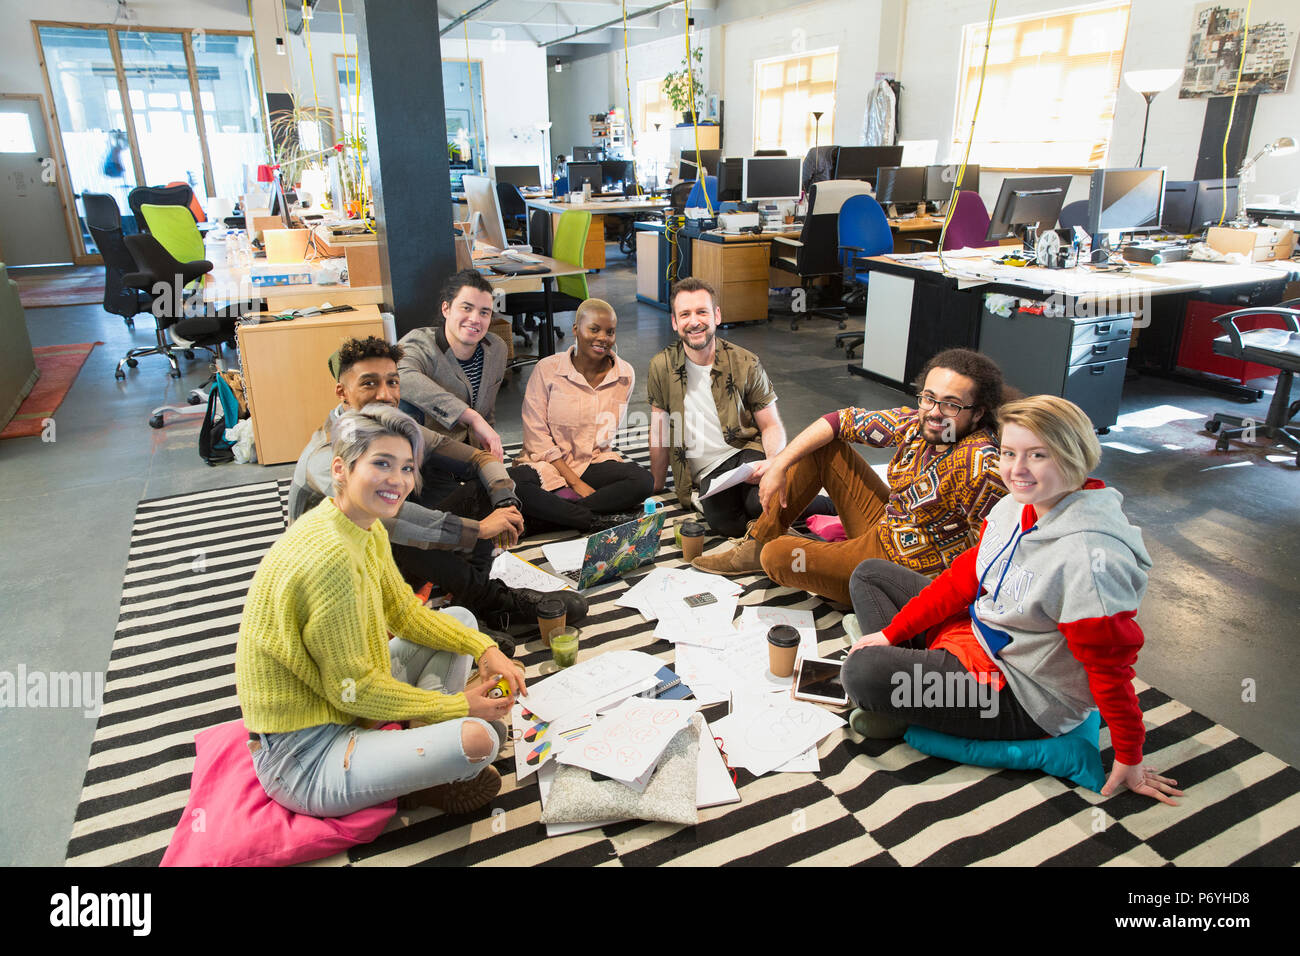 Portrait confident creative business team meeting, brainstorming in circle on office floor Stock Photo